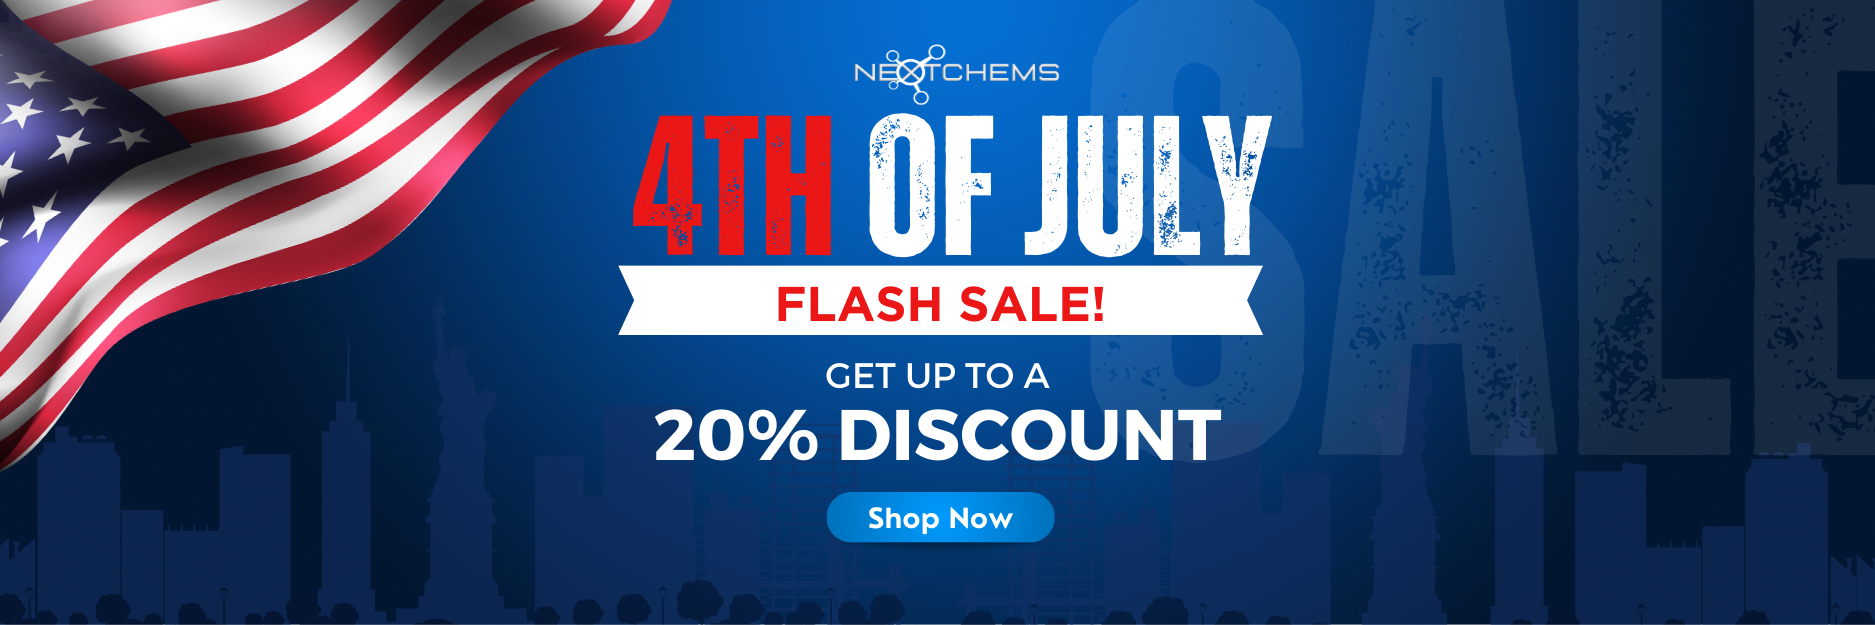 NC EMAIL Regular Announcement- 4th of July Sale